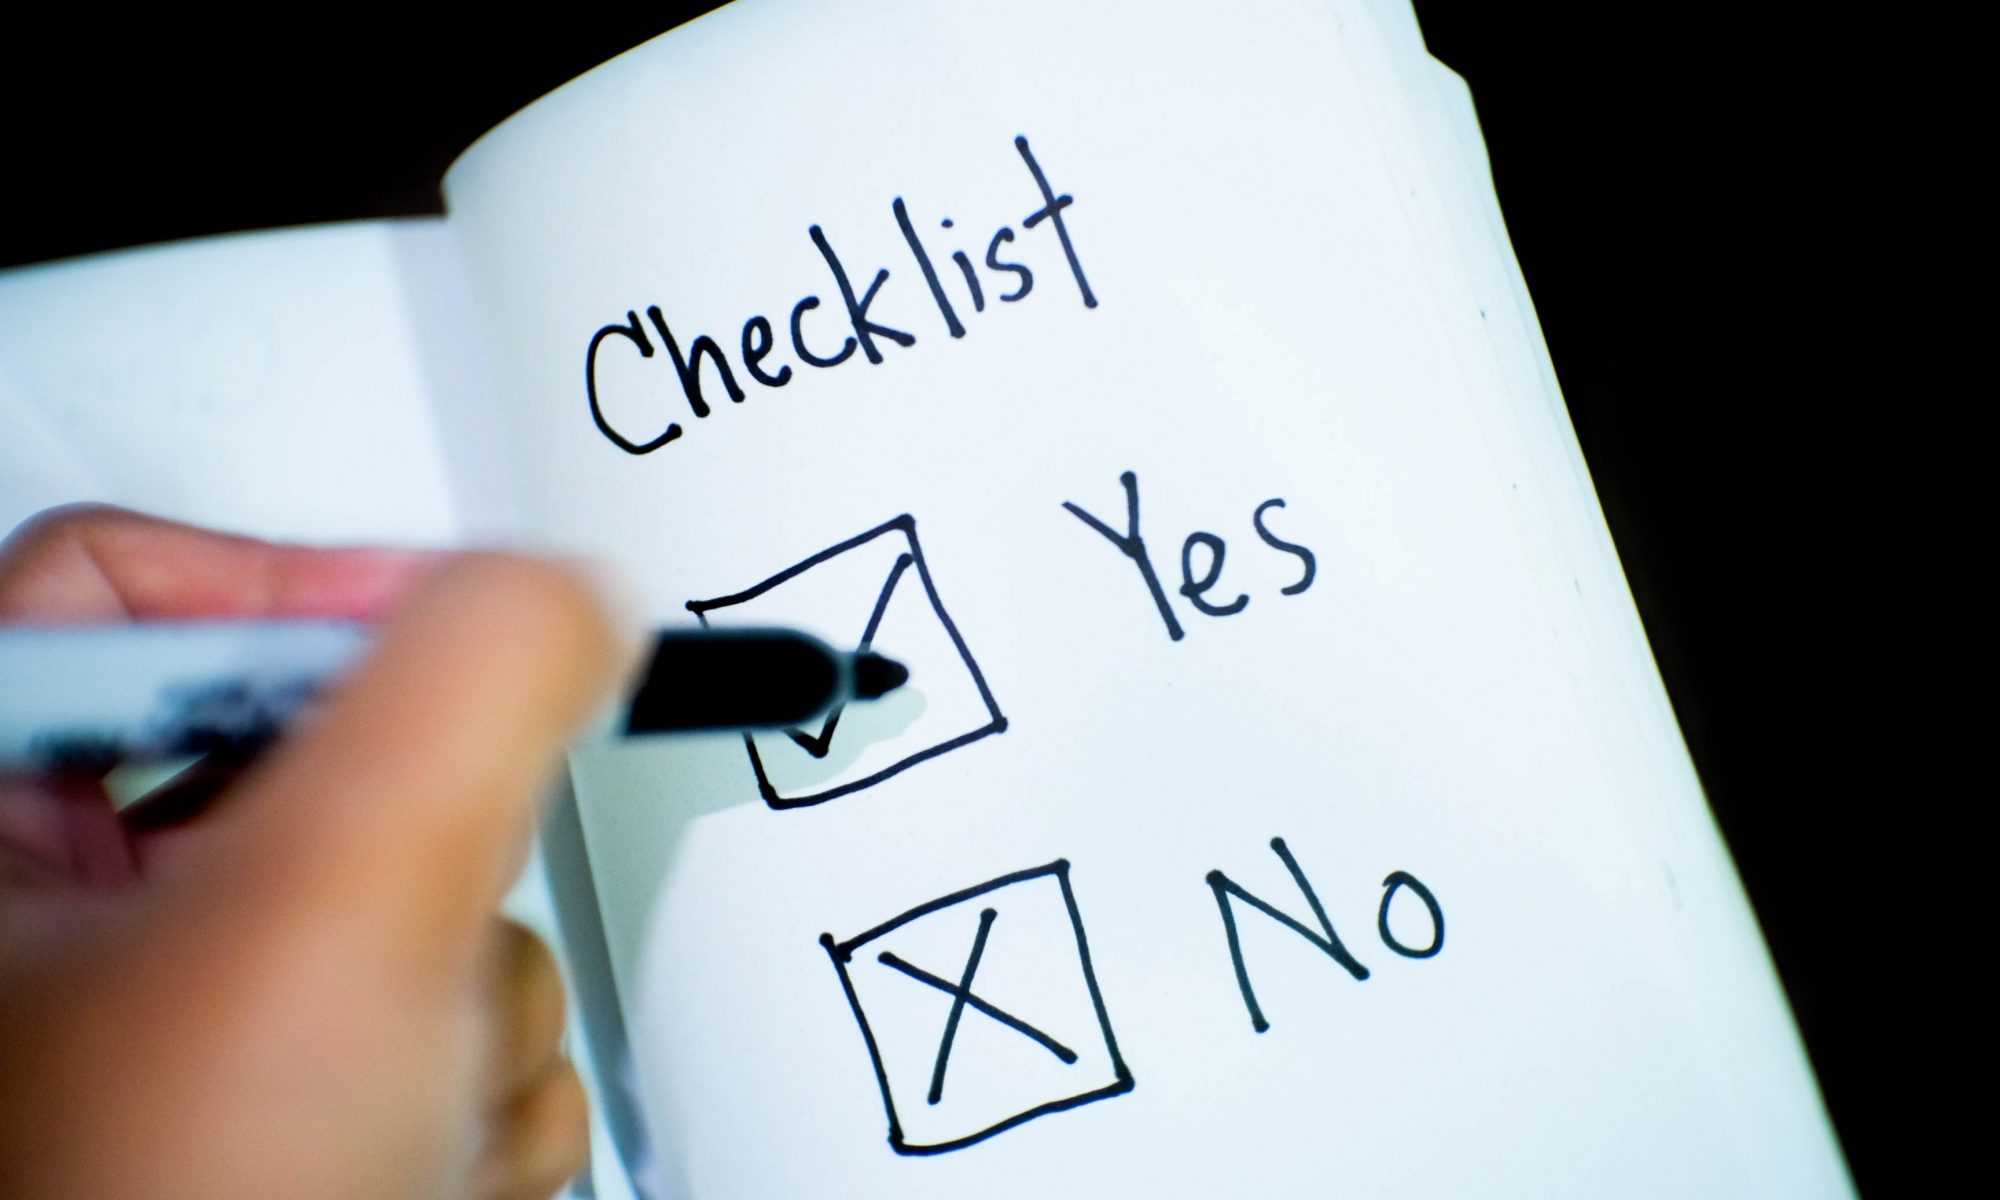 Completing a checklist